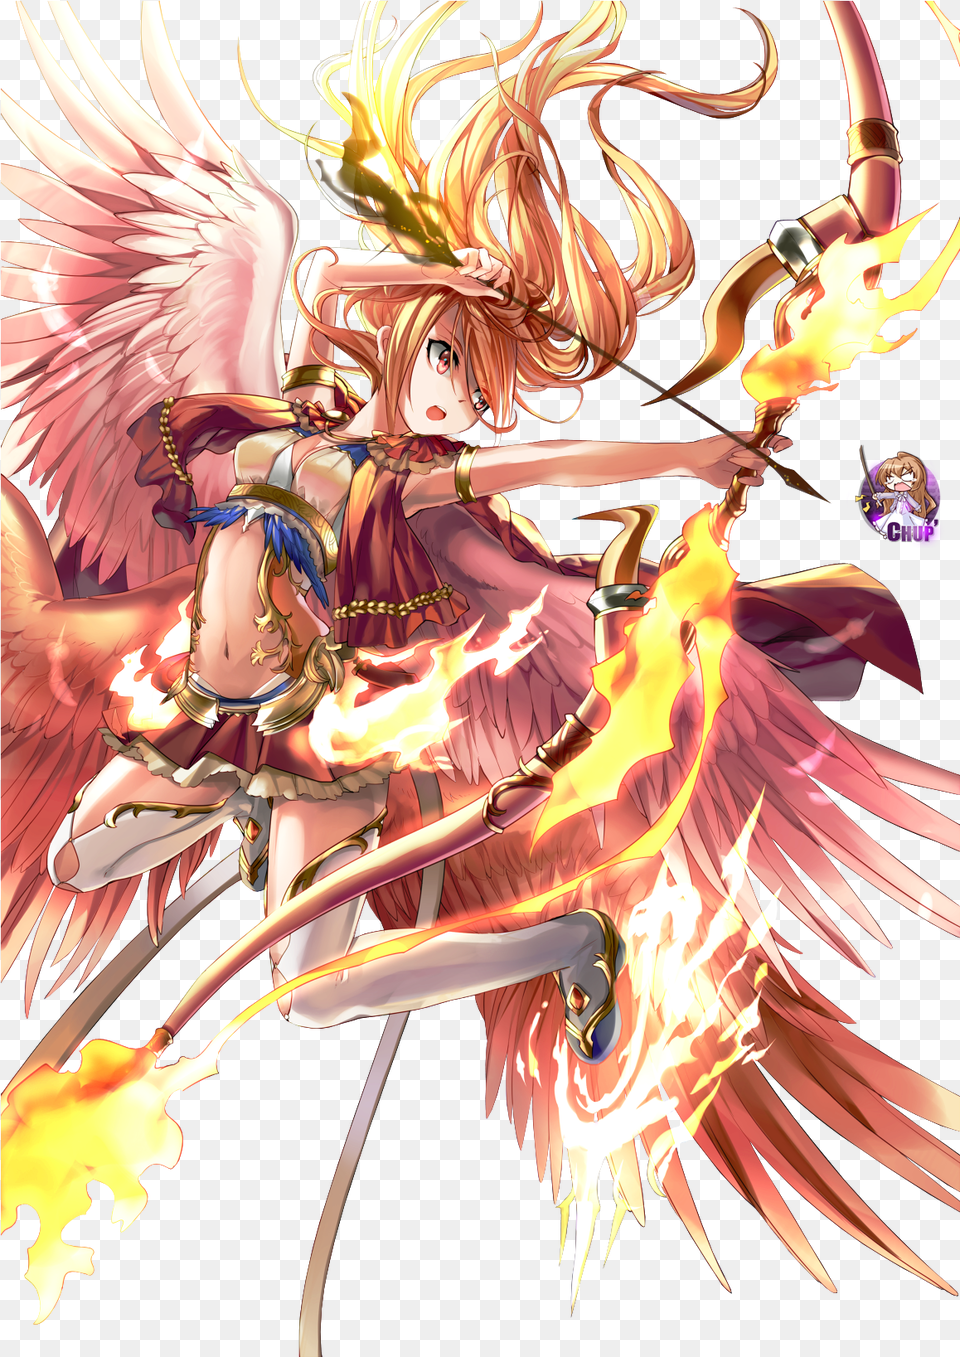 Anime Girl Fire Archer Image Cute Anime Girl Archer, Publication, Book, Comics, Adult Free Transparent Png